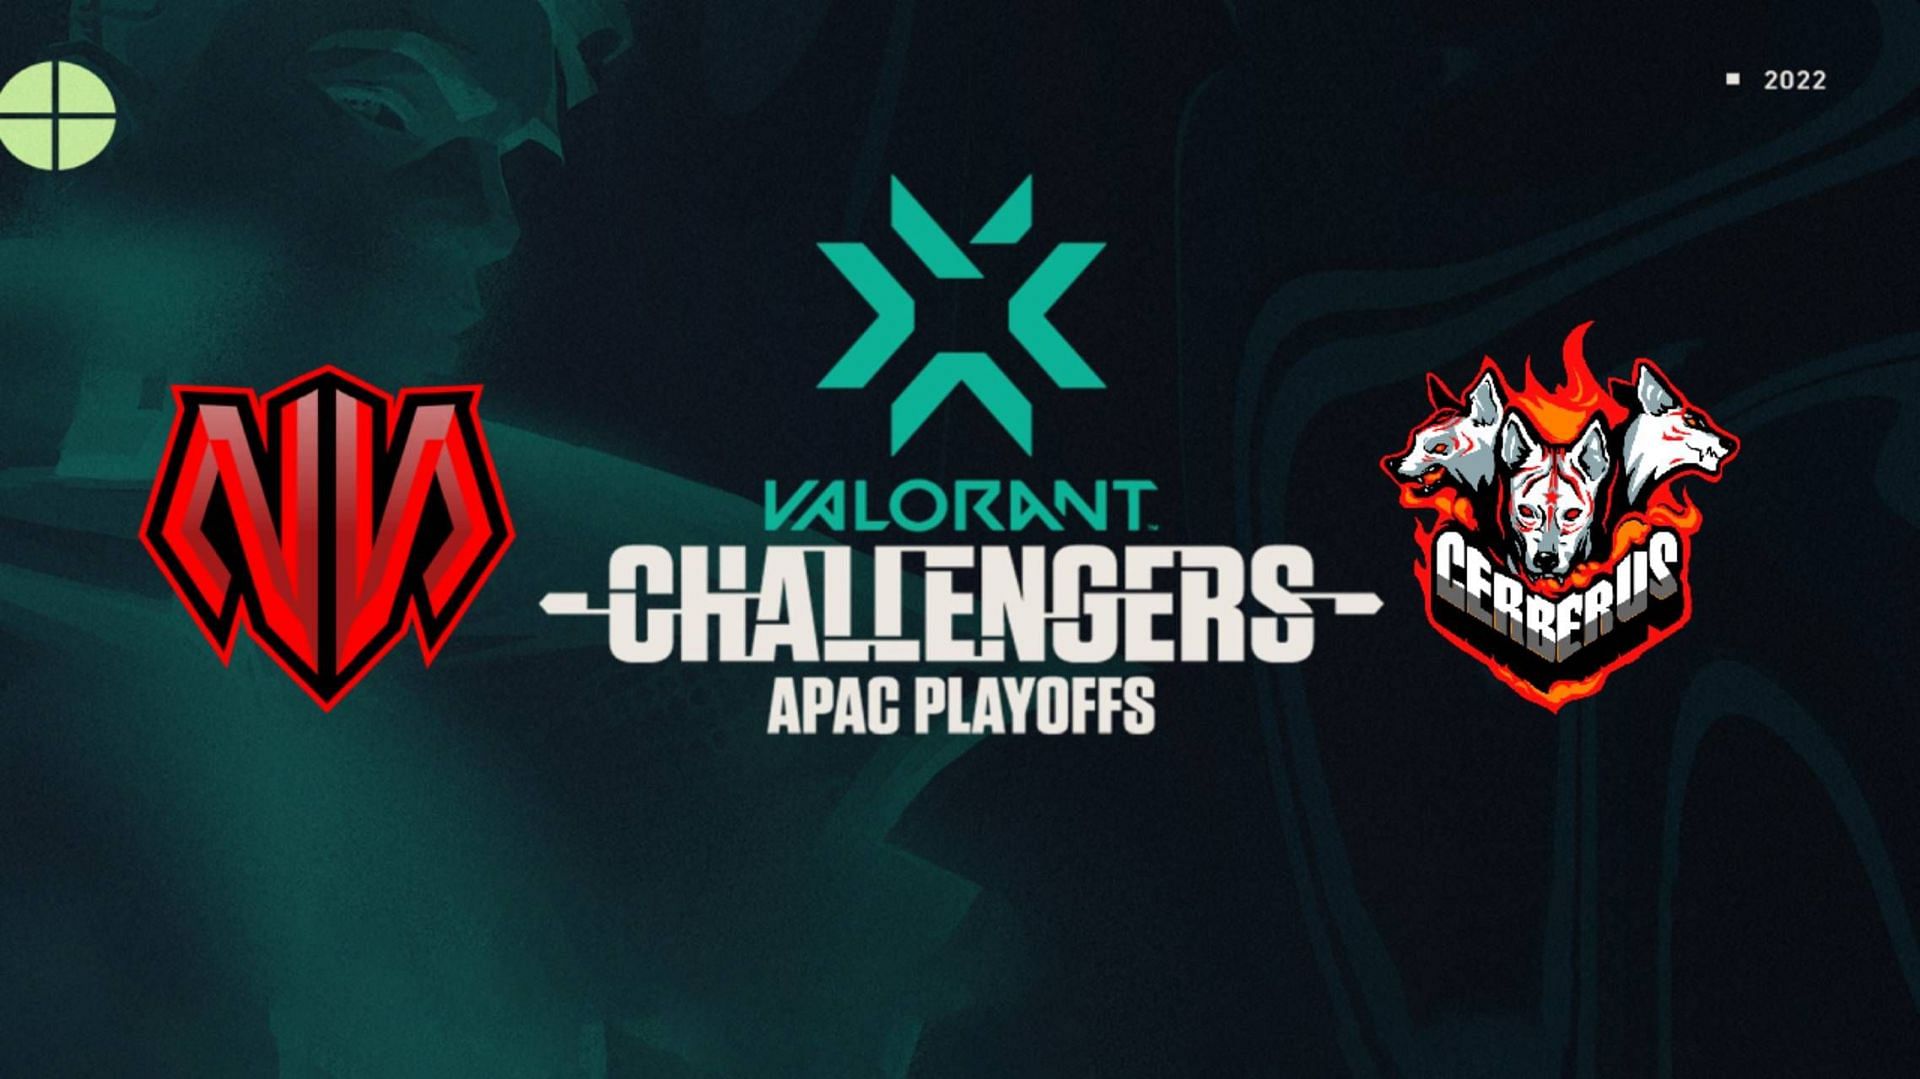 No Namers and Cerberus Esports in the VCT APAC Stage-1 Challengers (Image via Sportskeeda)